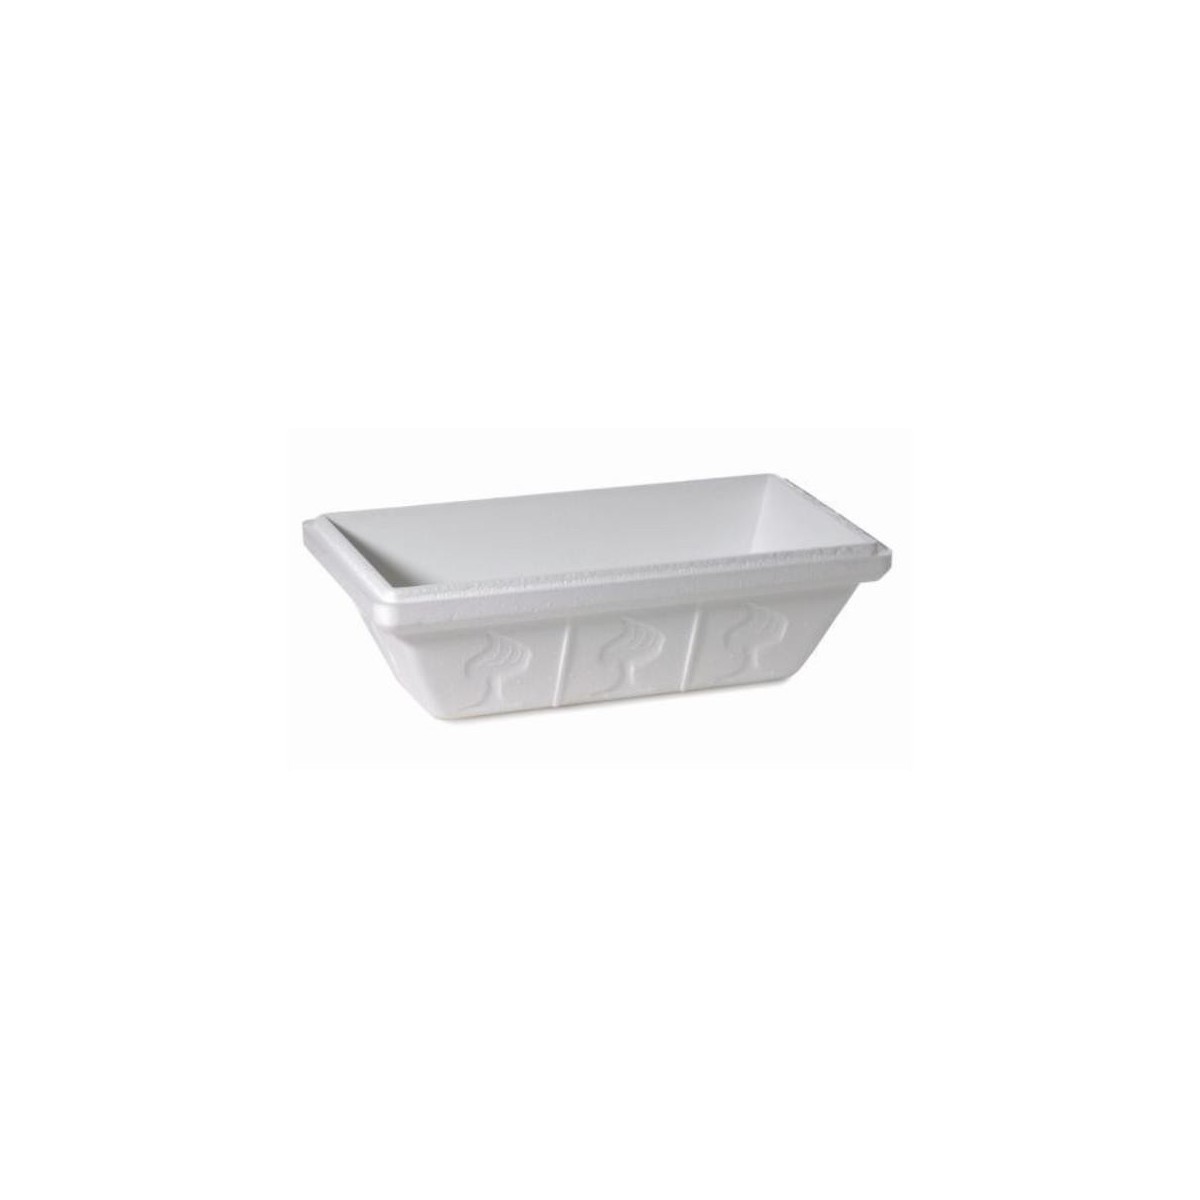 THERMOBOX SUPERPOLO 0 TADDIA 1/2 L - CAP 350GRTHERMOFORME 50 PCES